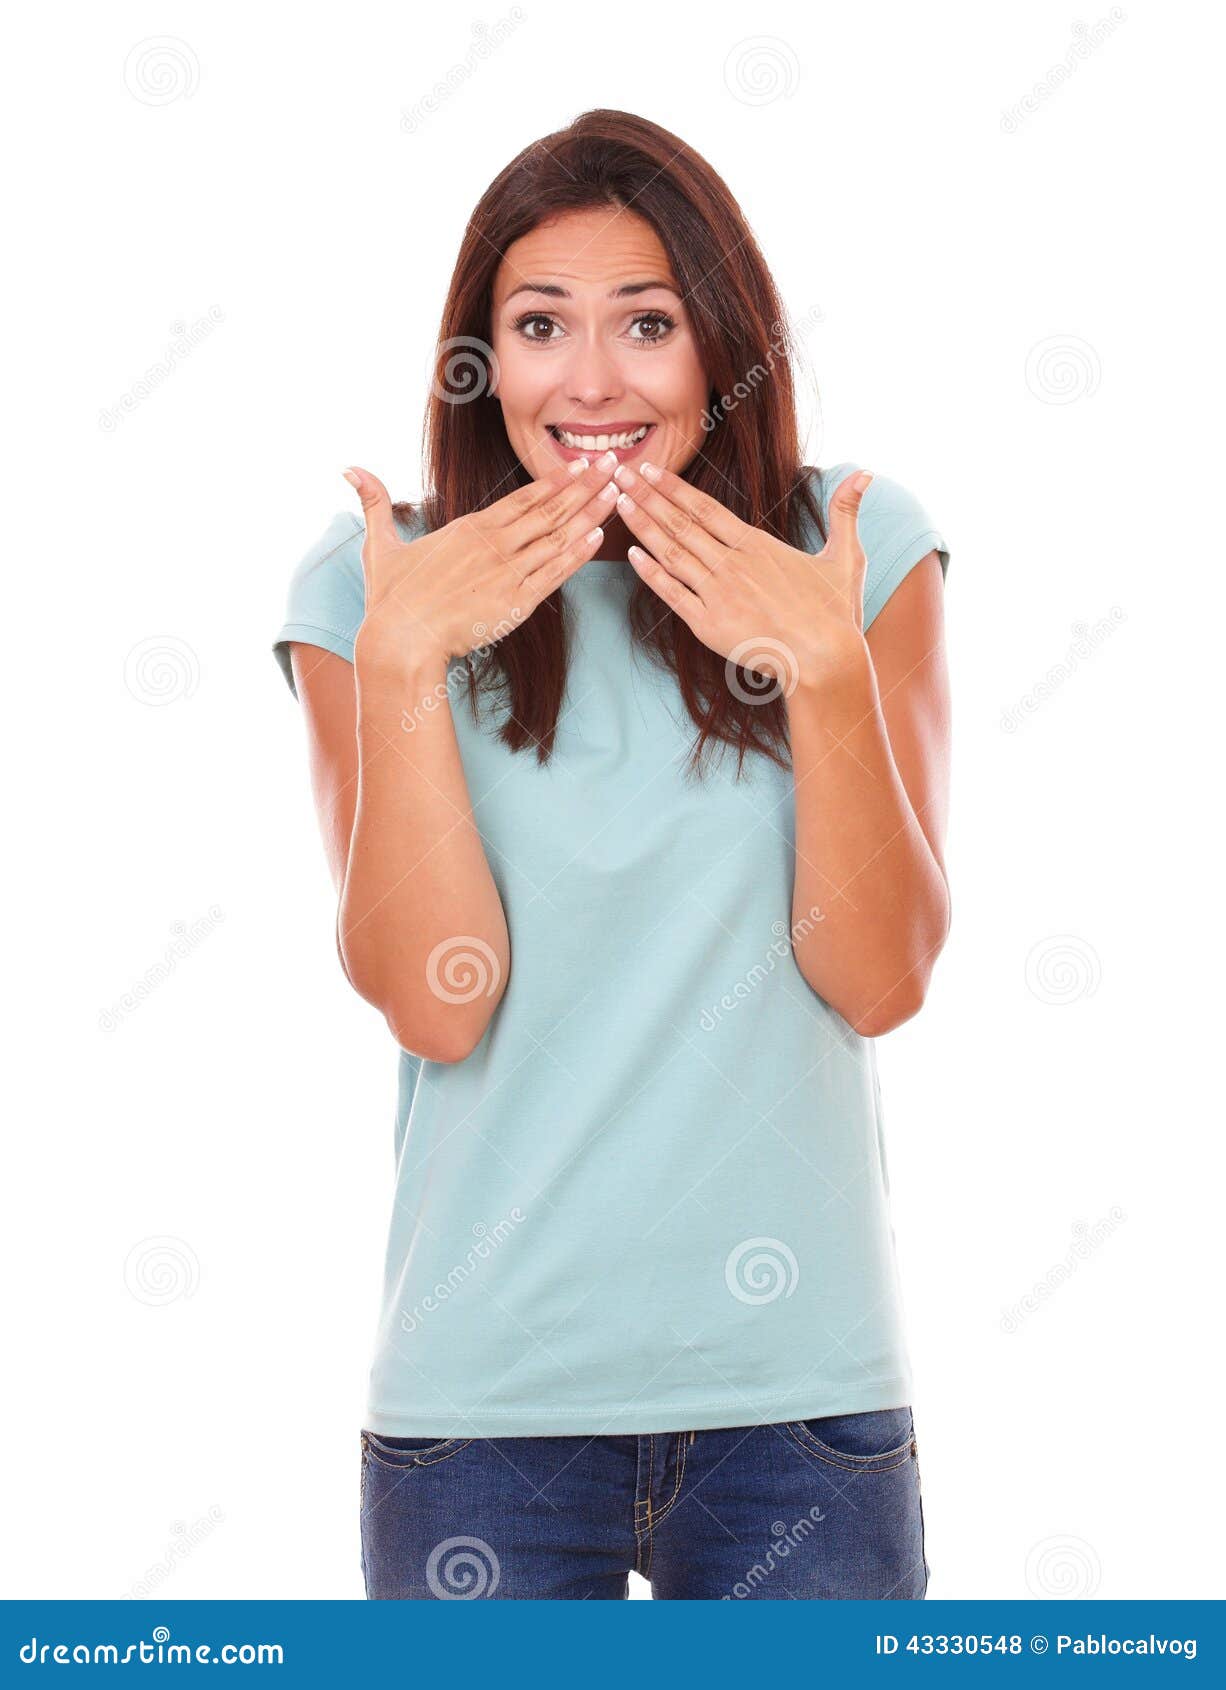 Shy Wrong Adult Female Smiling at You Stock Photo - Image of background ...